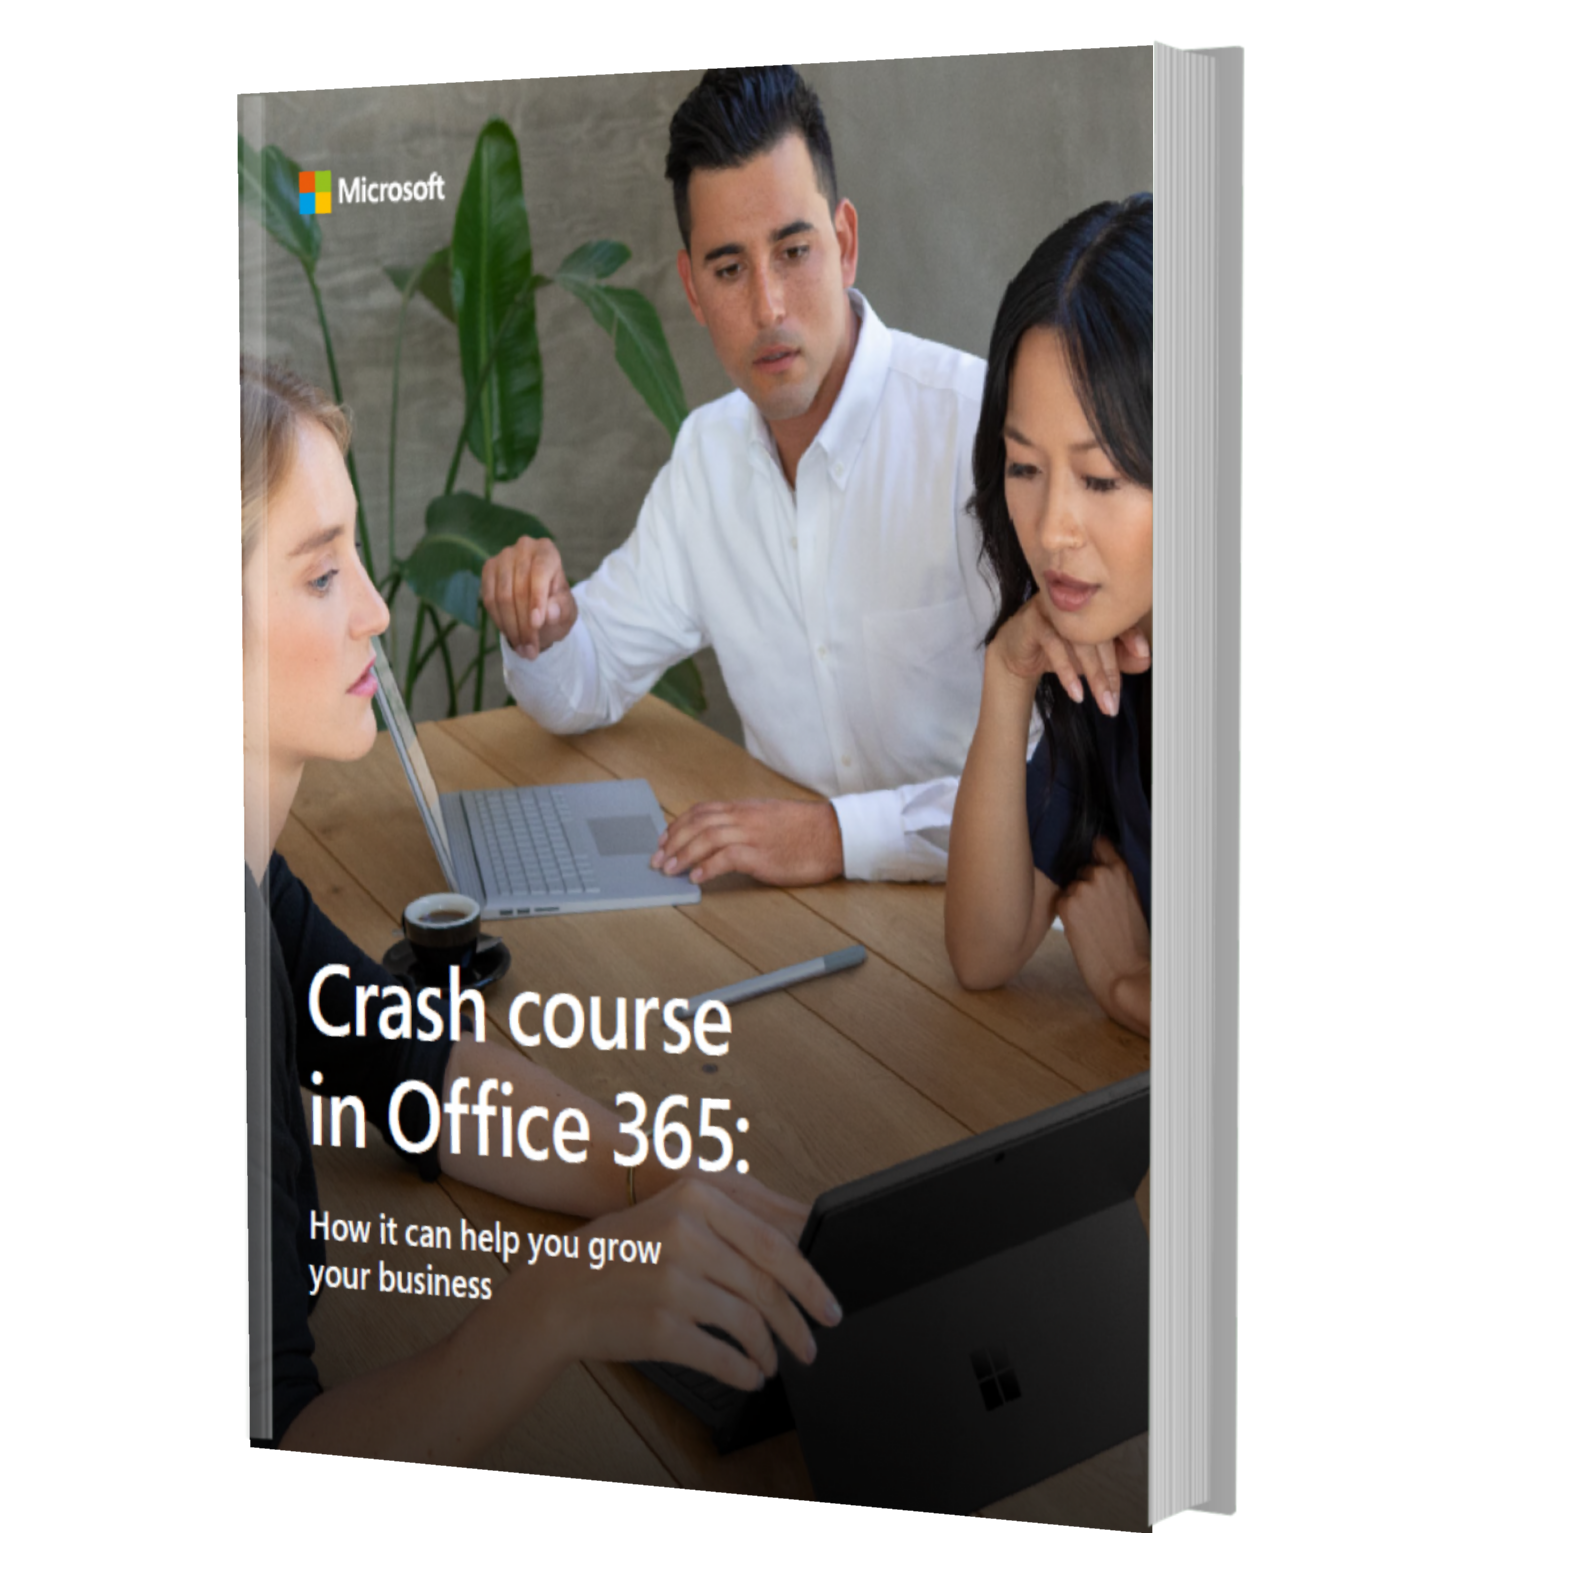 Crash Course in Office 365 - How It Can Grow Your Business Ebook